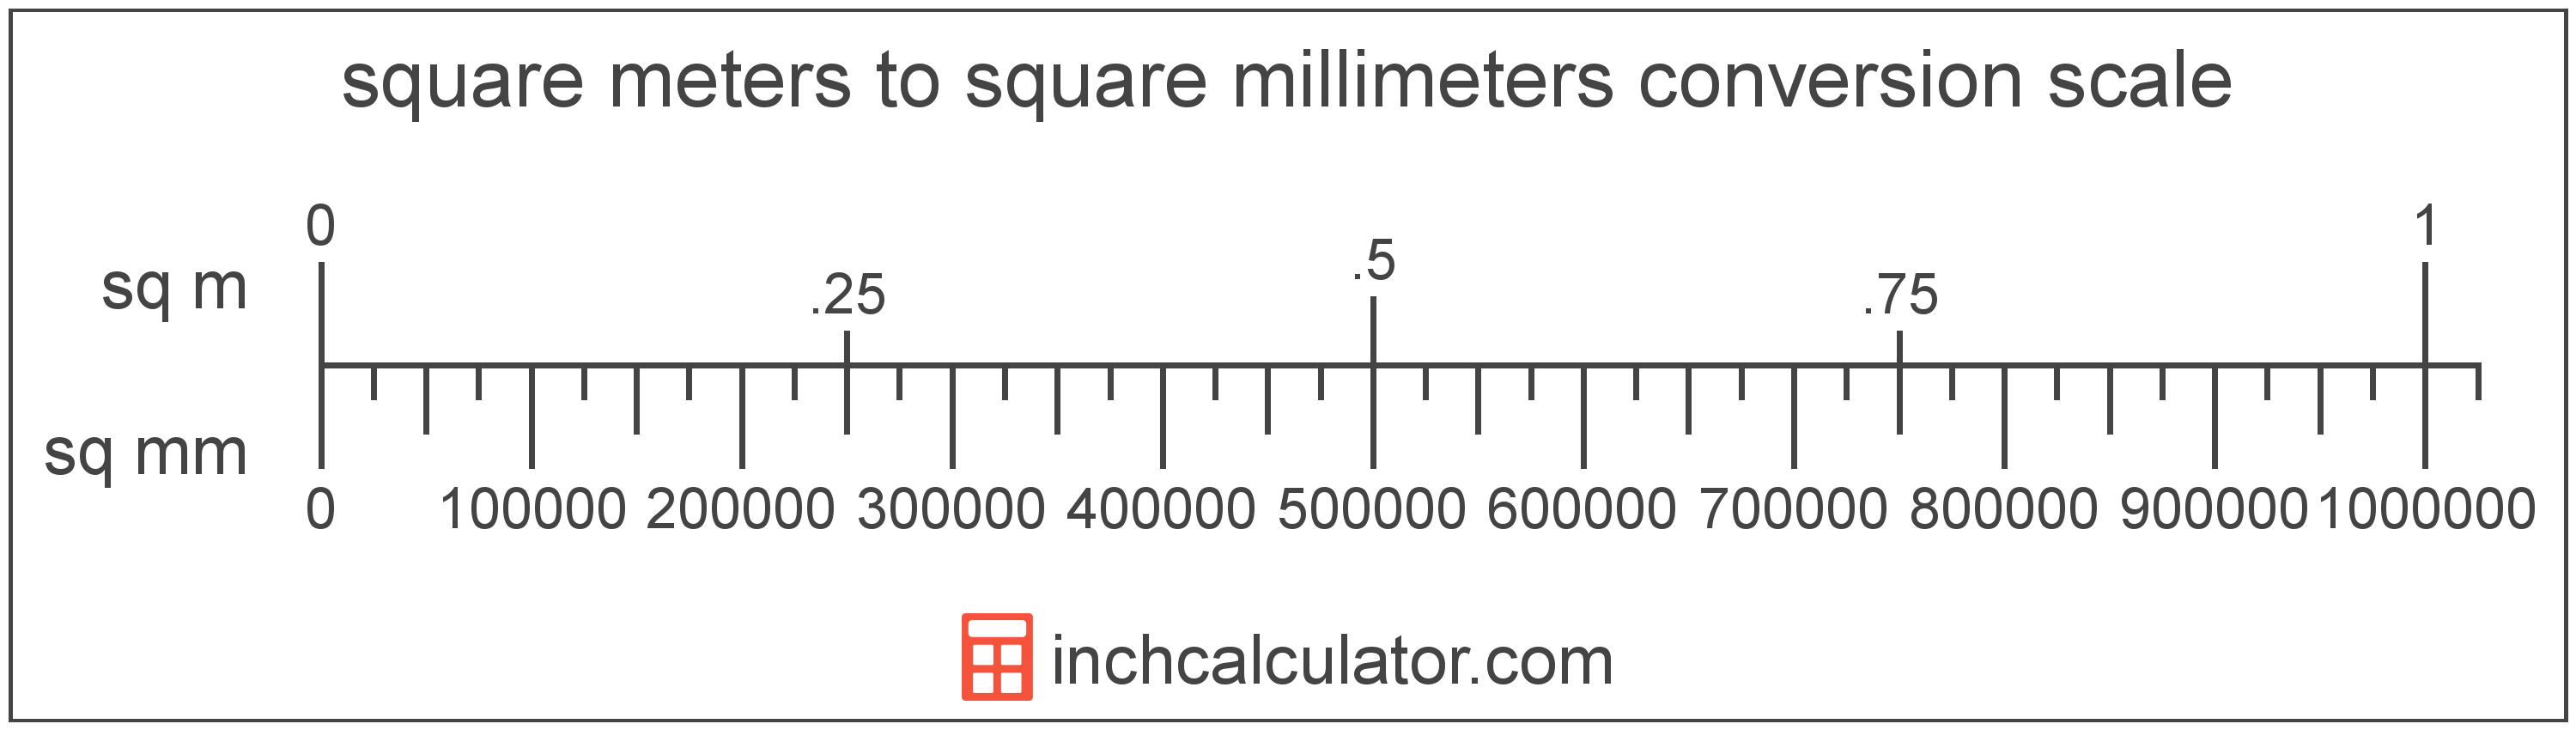 conversion scale showing square millimeters and equivalent square meters area values